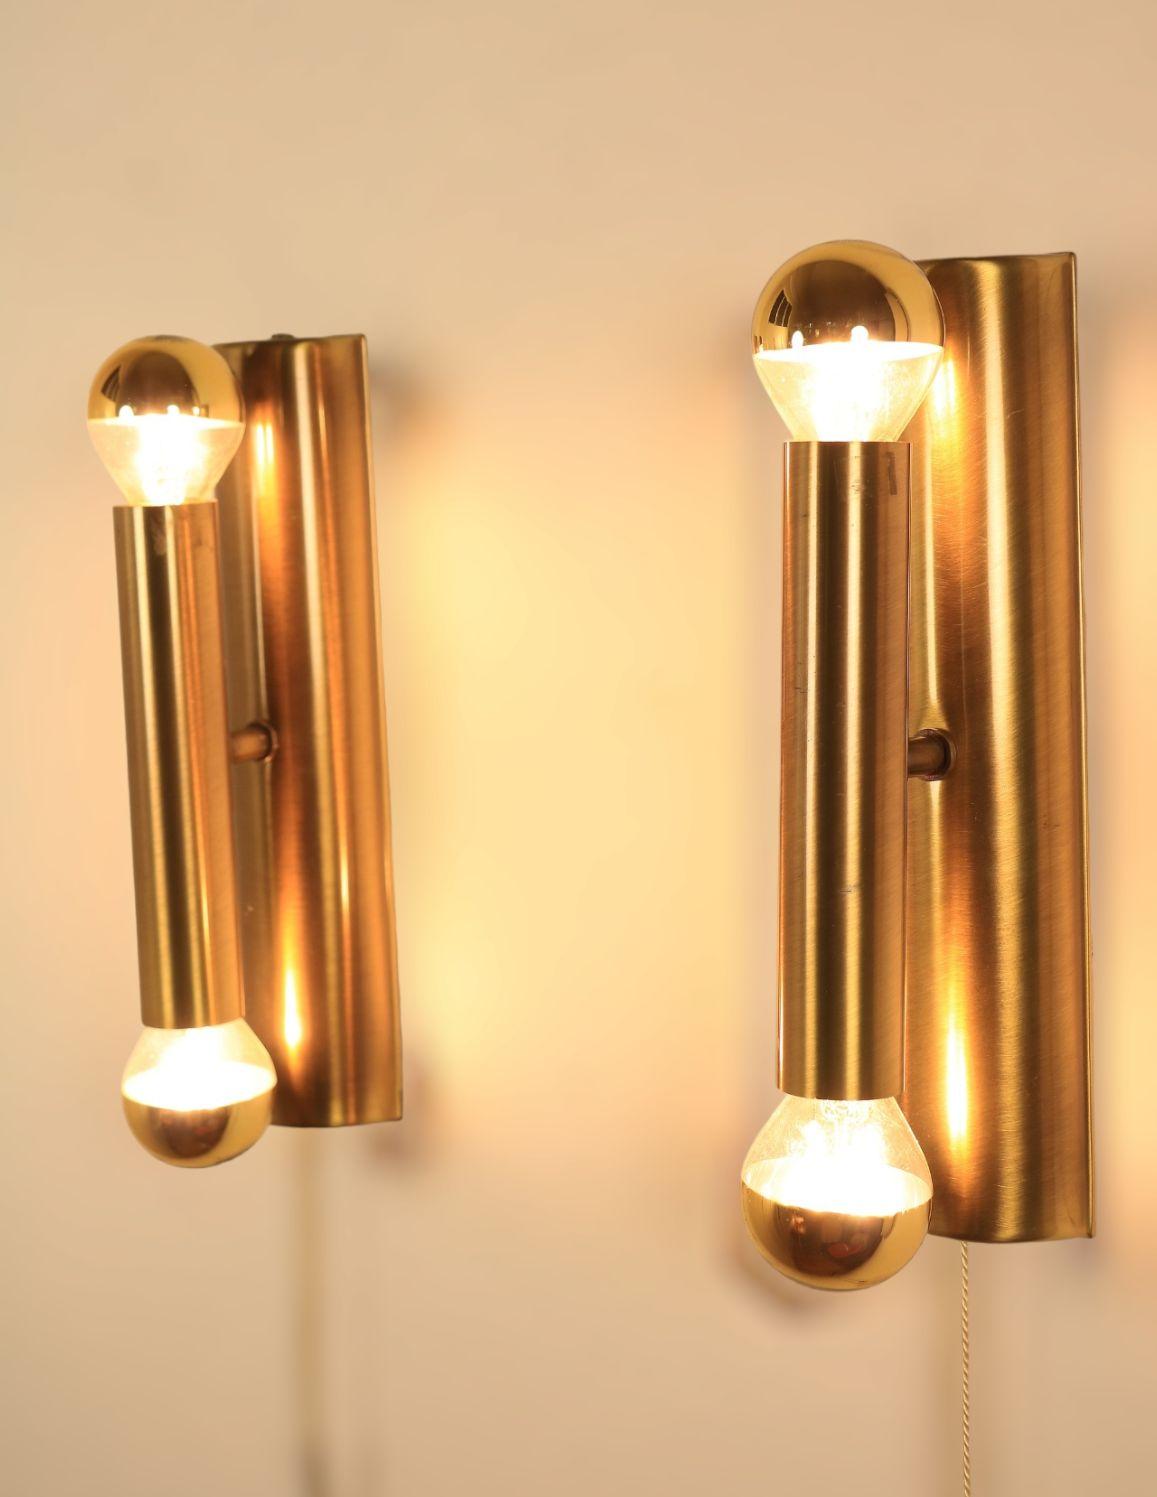 Set of Minimalistic Brass Wall Lights, 1980s For Sale 1